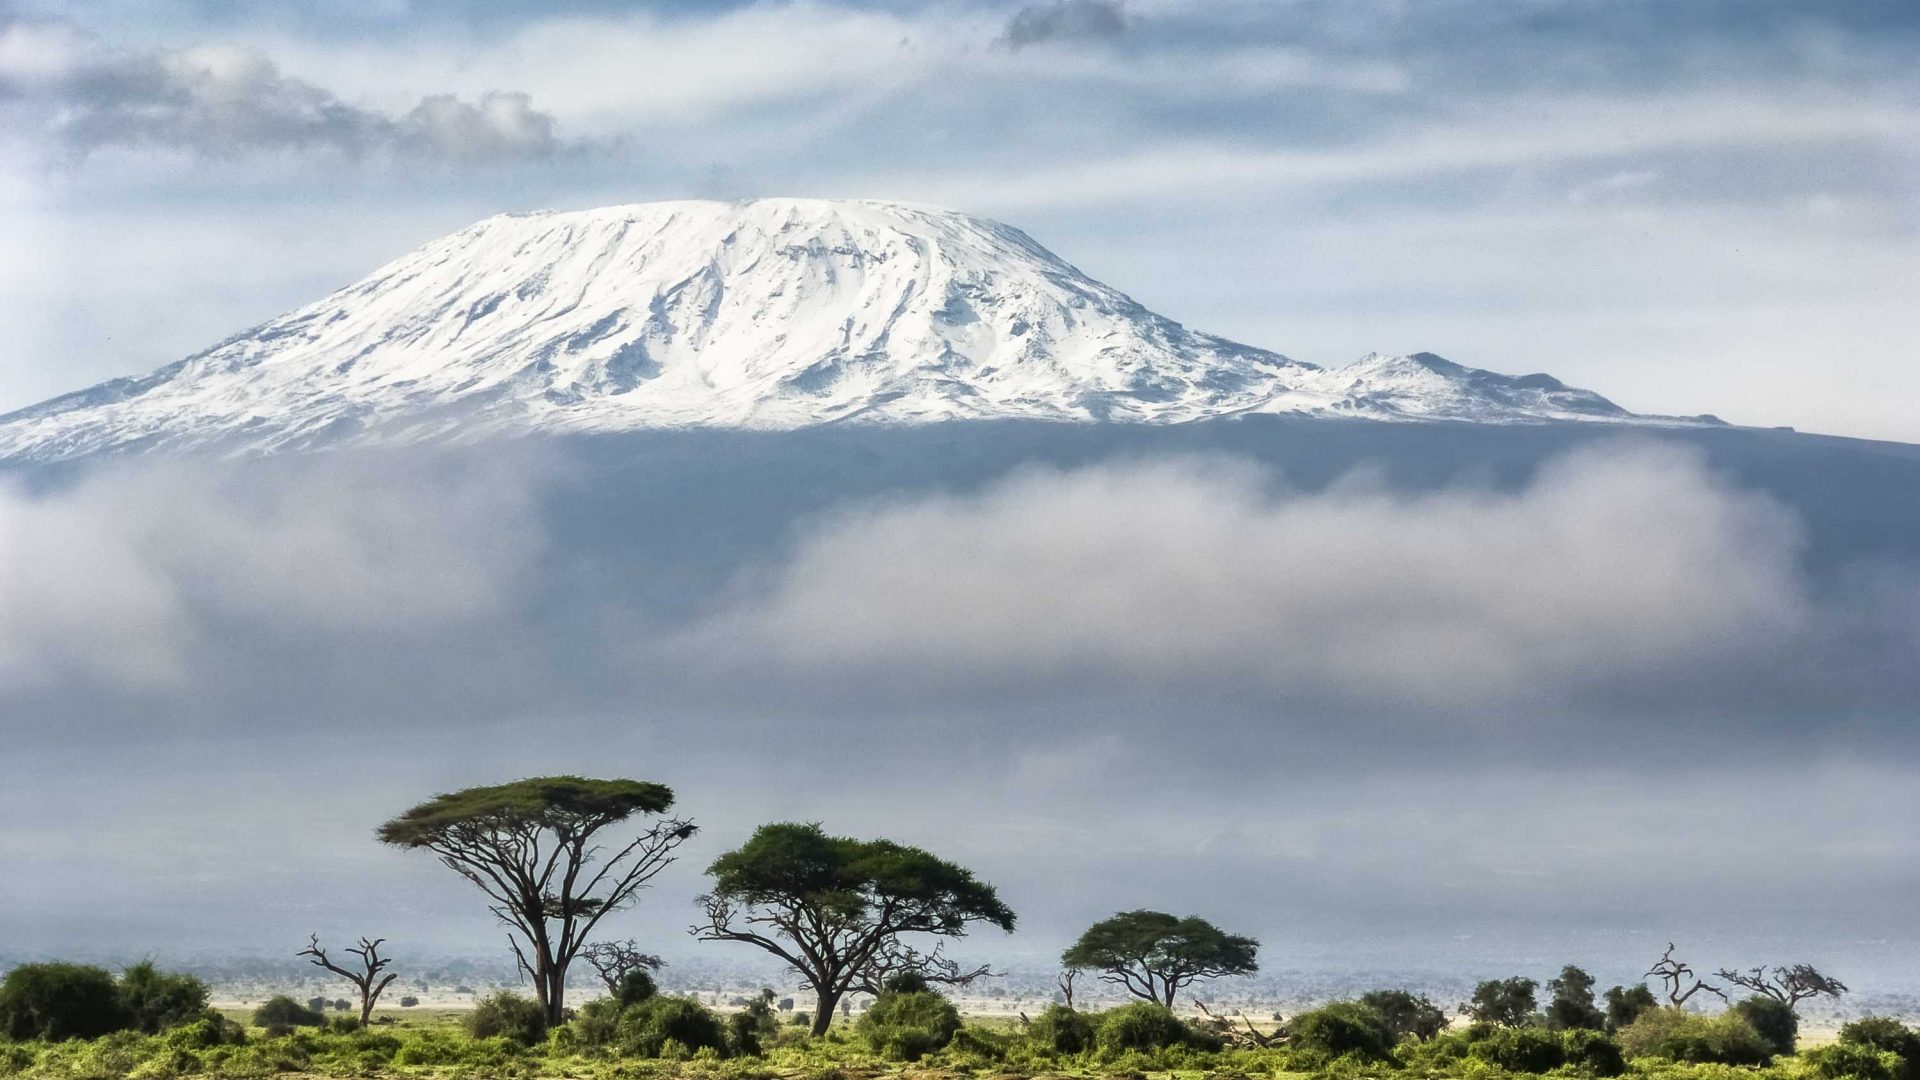 Snow covered Mount Kilimanjaro in the background with trees and cloud in the foreground.